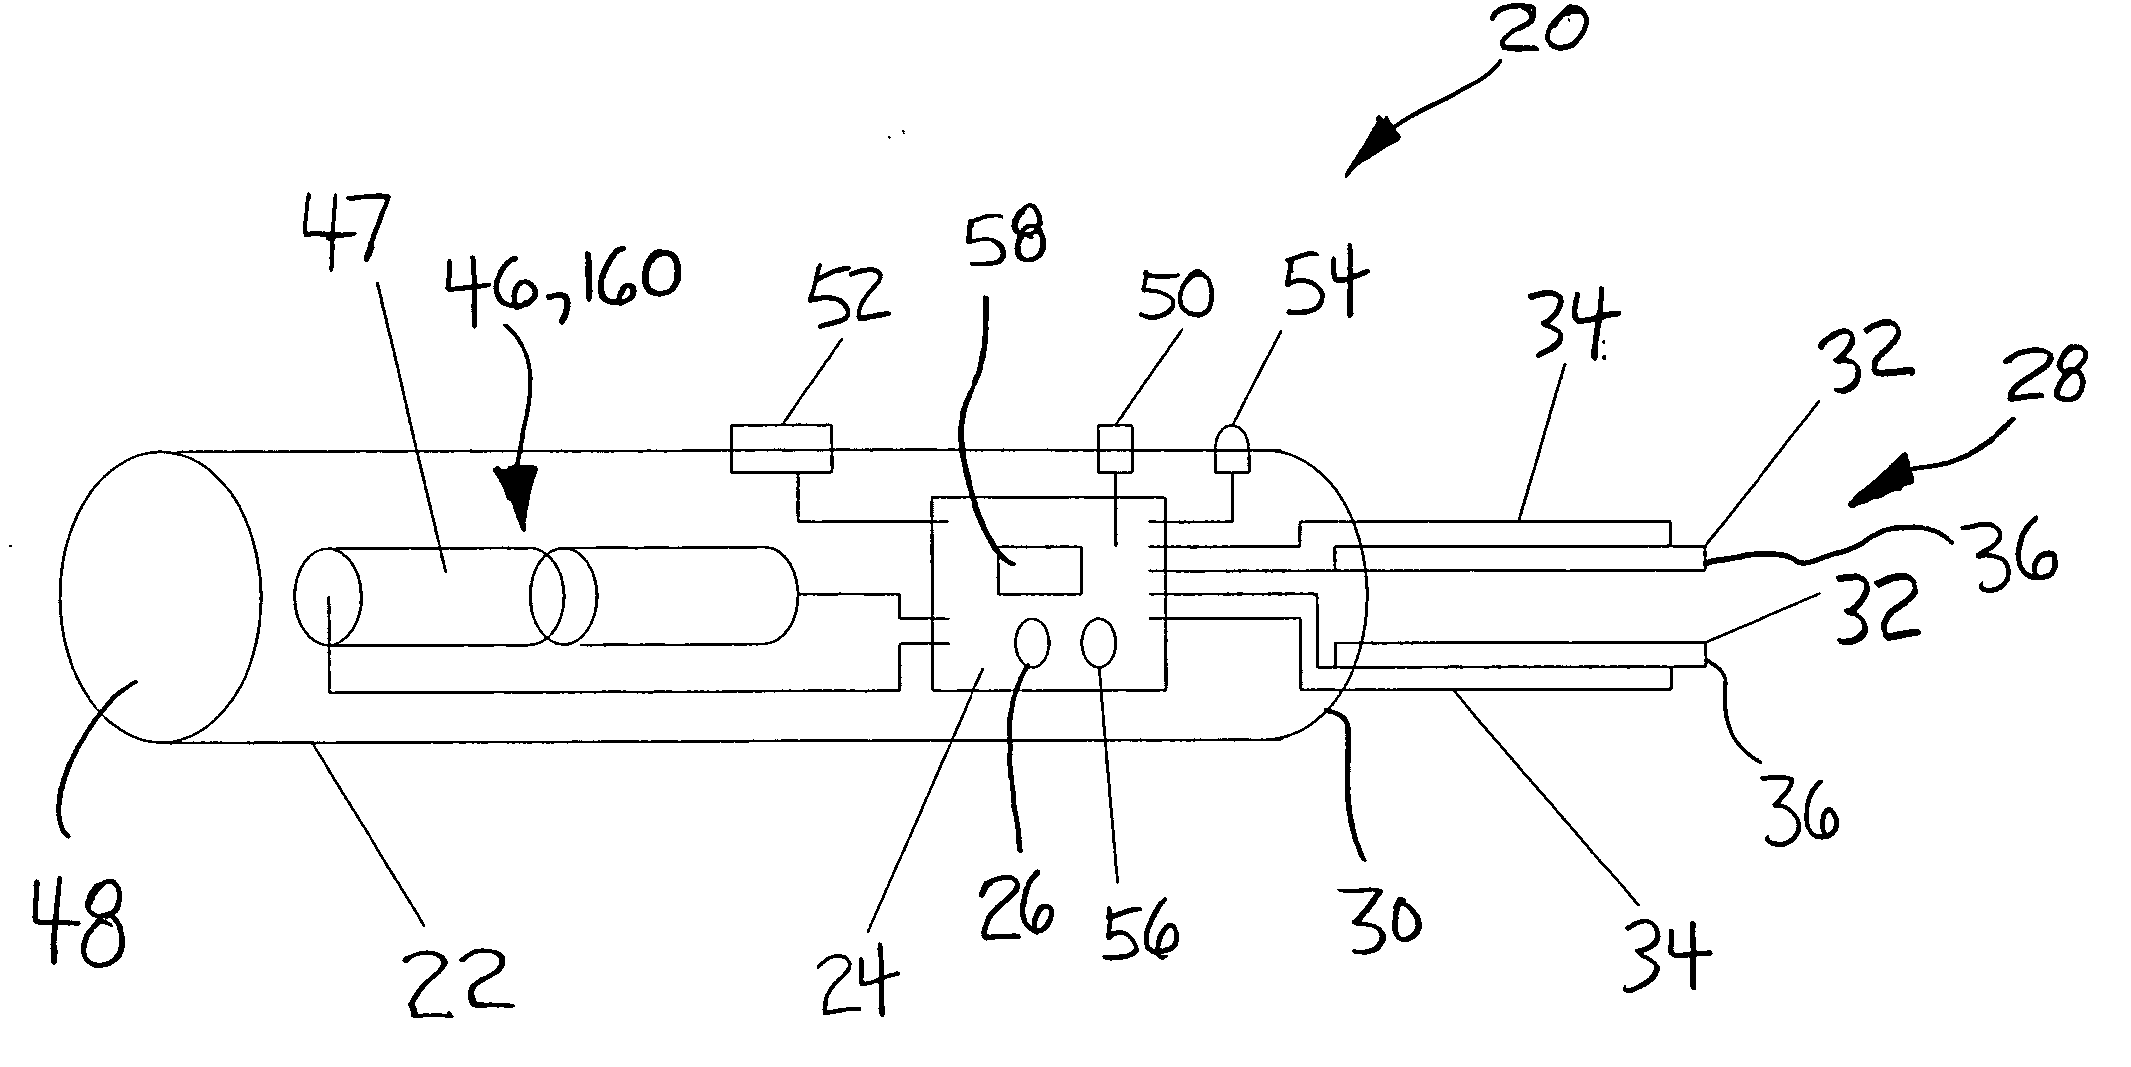 System and device for heating or cooling shape memory surgical devices